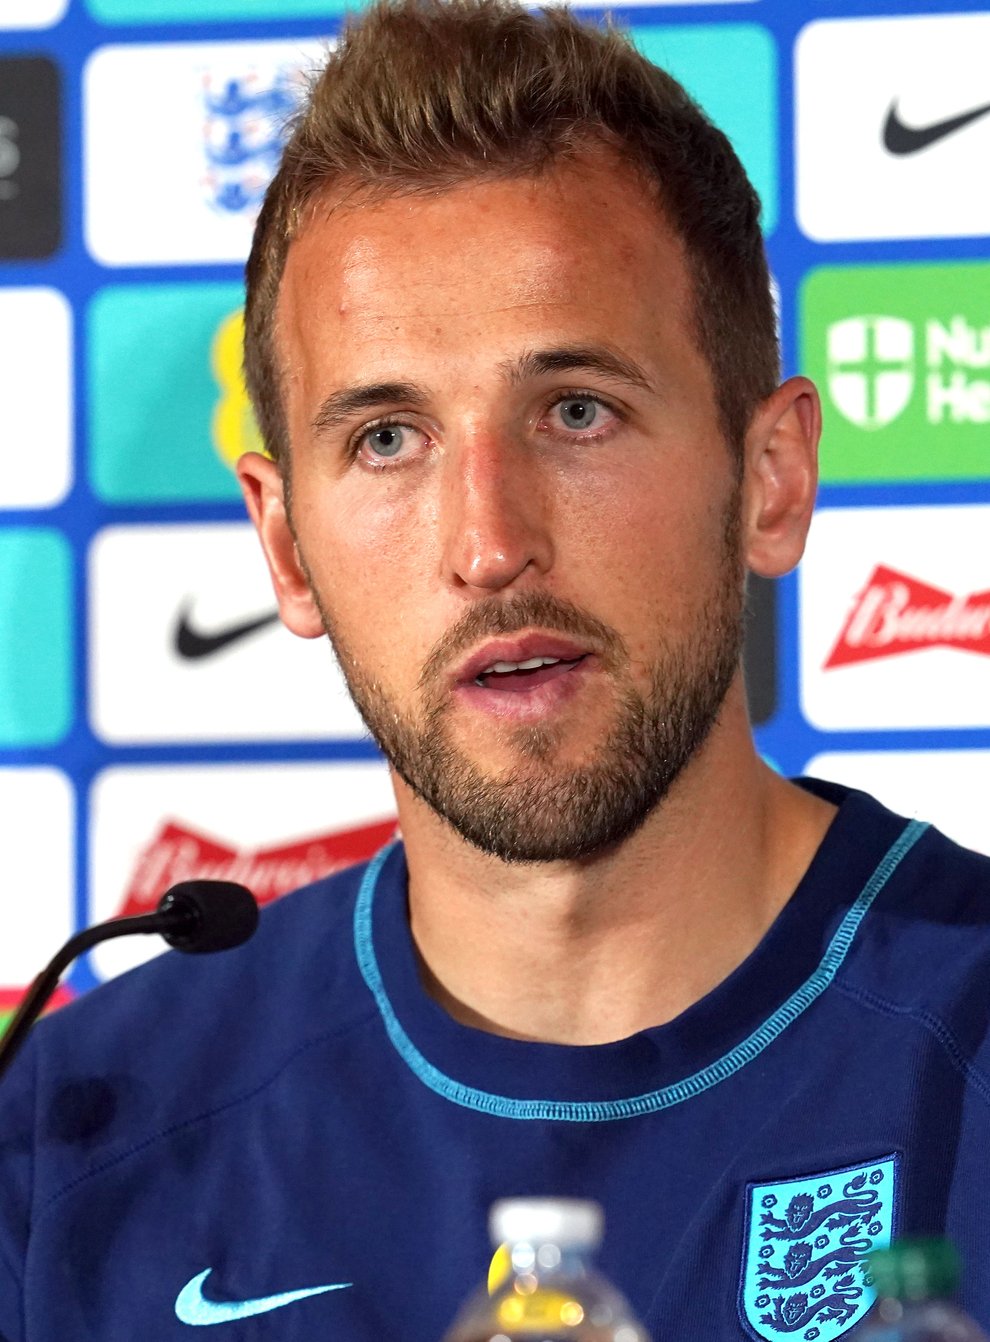 Harry Kane is set to captain England at this winter’s World Cup (Nick Potts/PA)